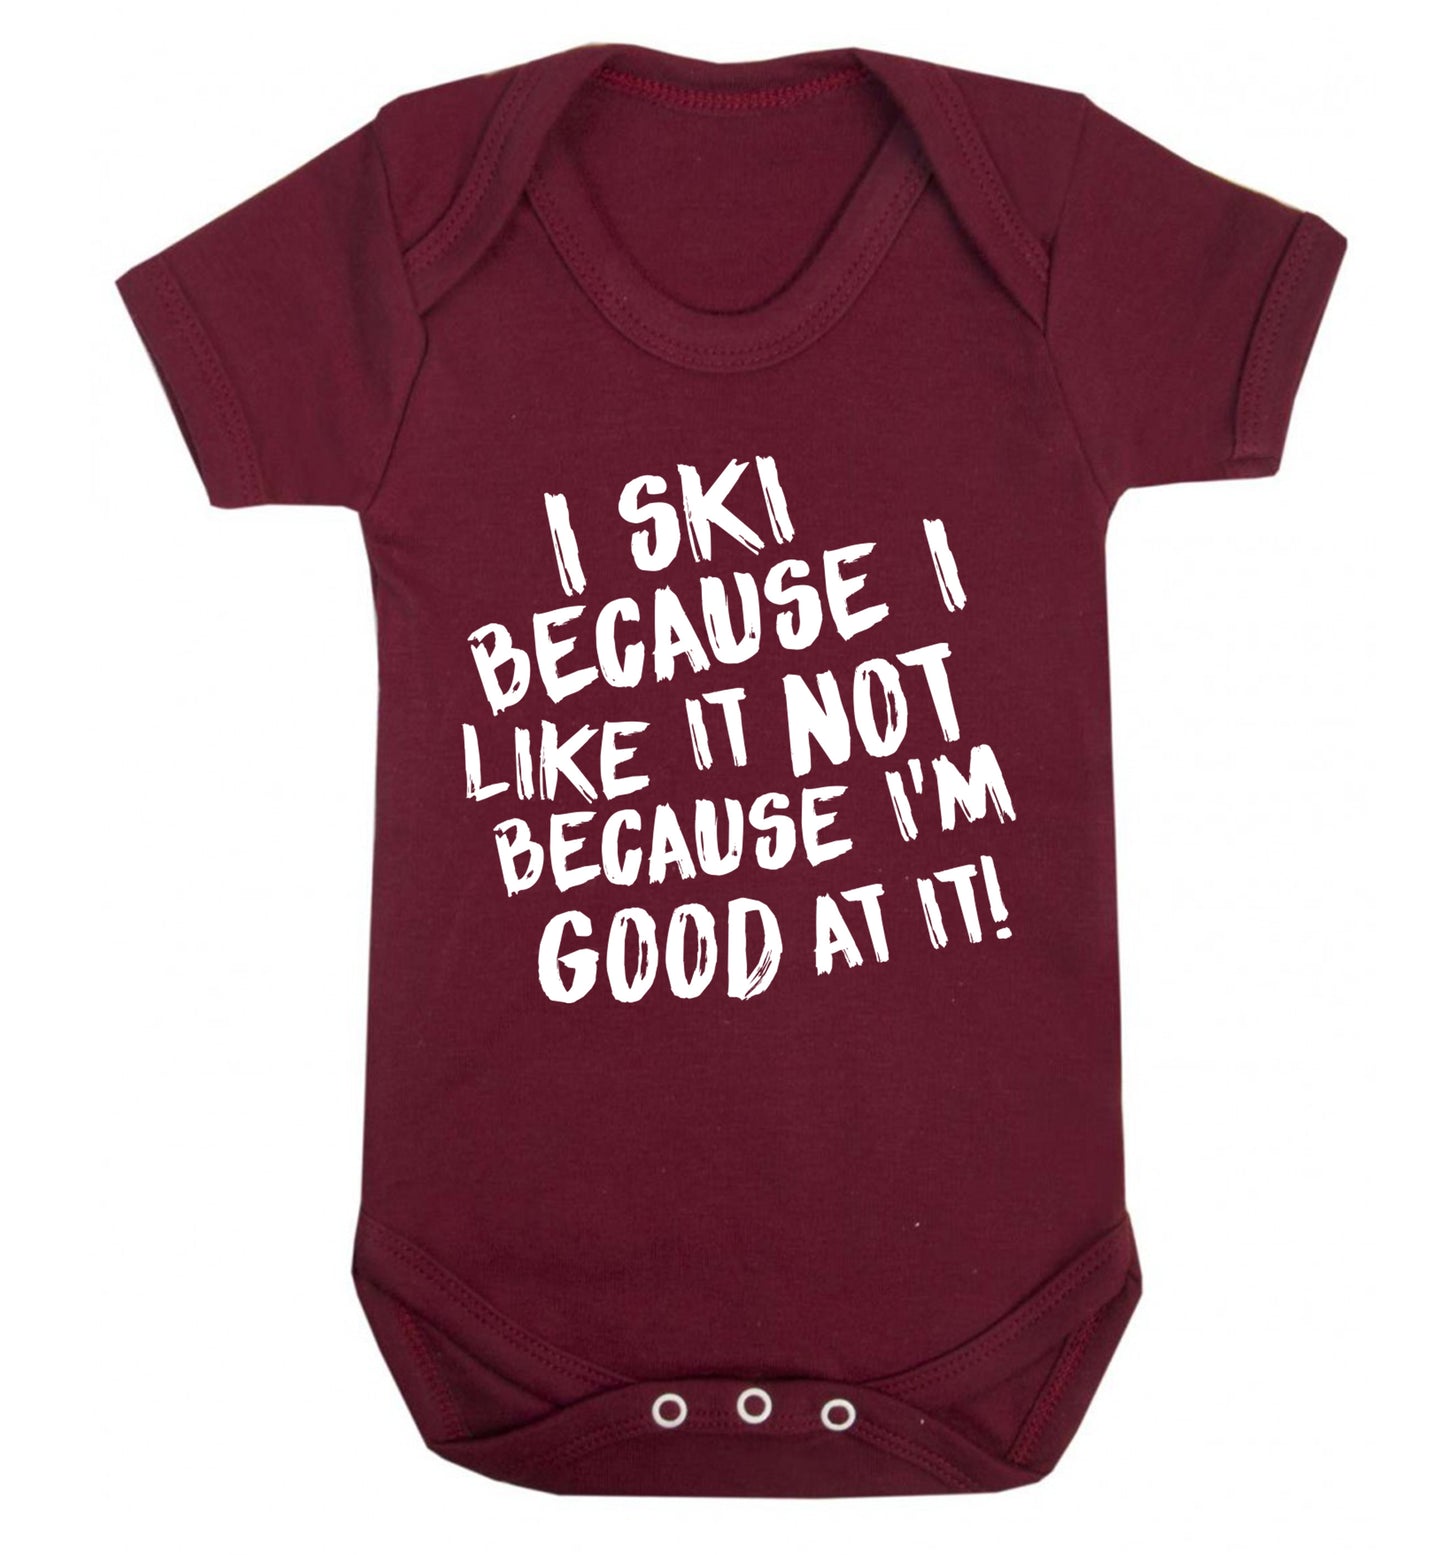 I ski because I like it not because I'm good at it Baby Vest maroon 18-24 months